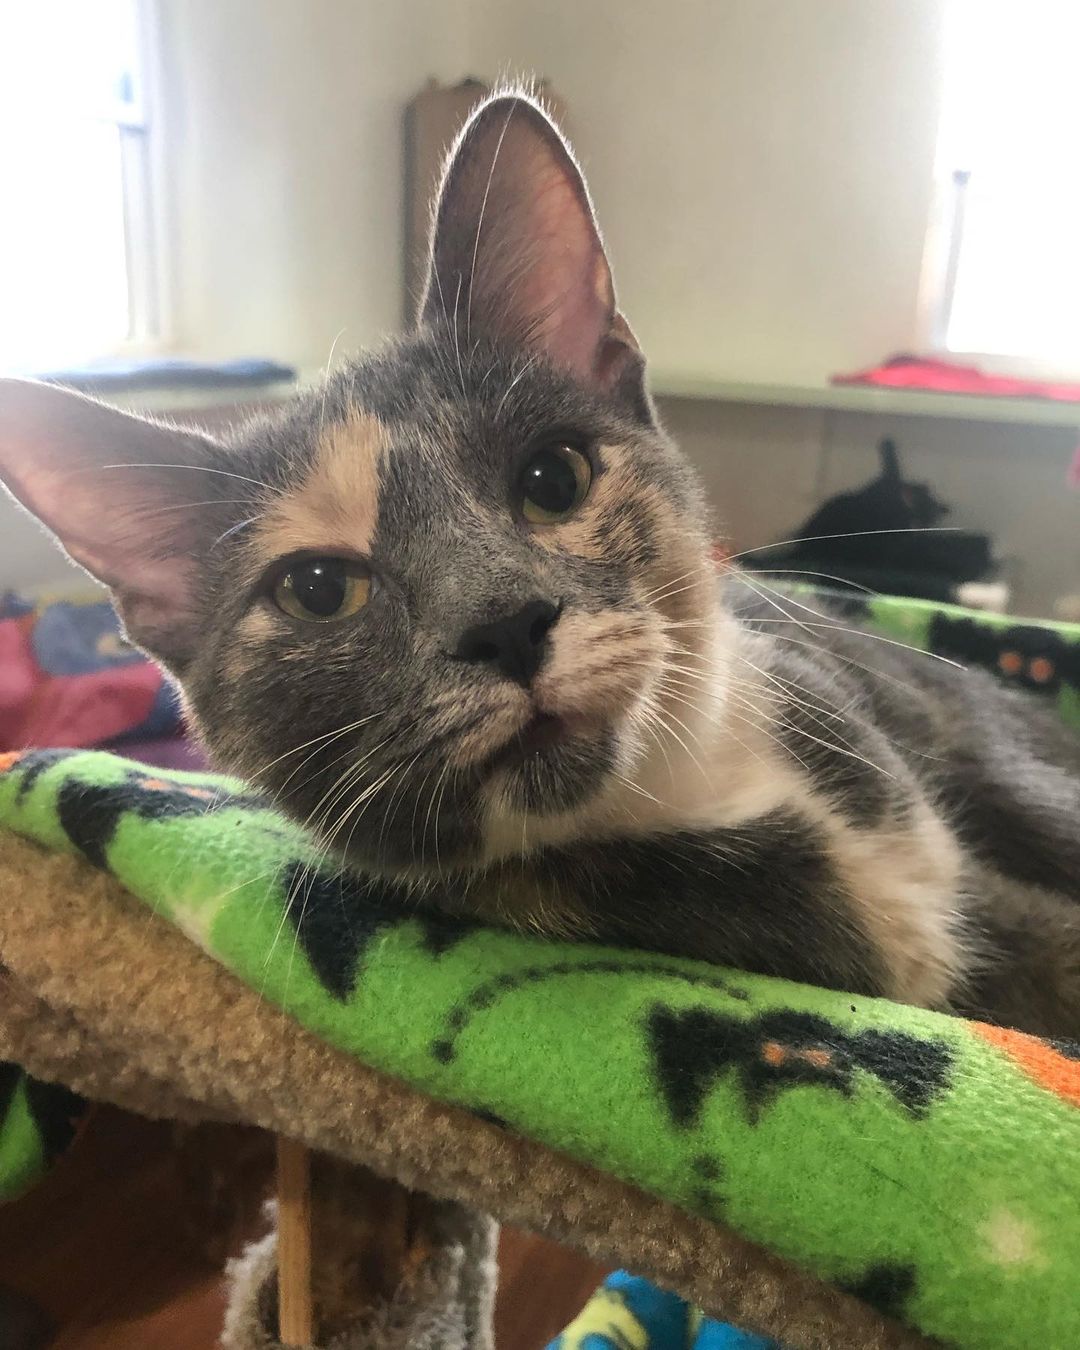 Dahlia lucked out and got adopted this week! Now this sweet girl gets a forever lap to cuddle on! <a target='_blank' href='https://www.instagram.com/explore/tags/catsofinstagram/'>#catsofinstagram</a> <a target='_blank' href='https://www.instagram.com/explore/tags/cats/'>#cats</a> <a target='_blank' href='https://www.instagram.com/explore/tags/cats_of_instagram/'>#cats_of_instagram</a> <a target='_blank' href='https://www.instagram.com/explore/tags/adoptdontshop/'>#adoptdontshop</a> <a target='_blank' href='https://www.instagram.com/explore/tags/ashlandohio/'>#ashlandohio</a>